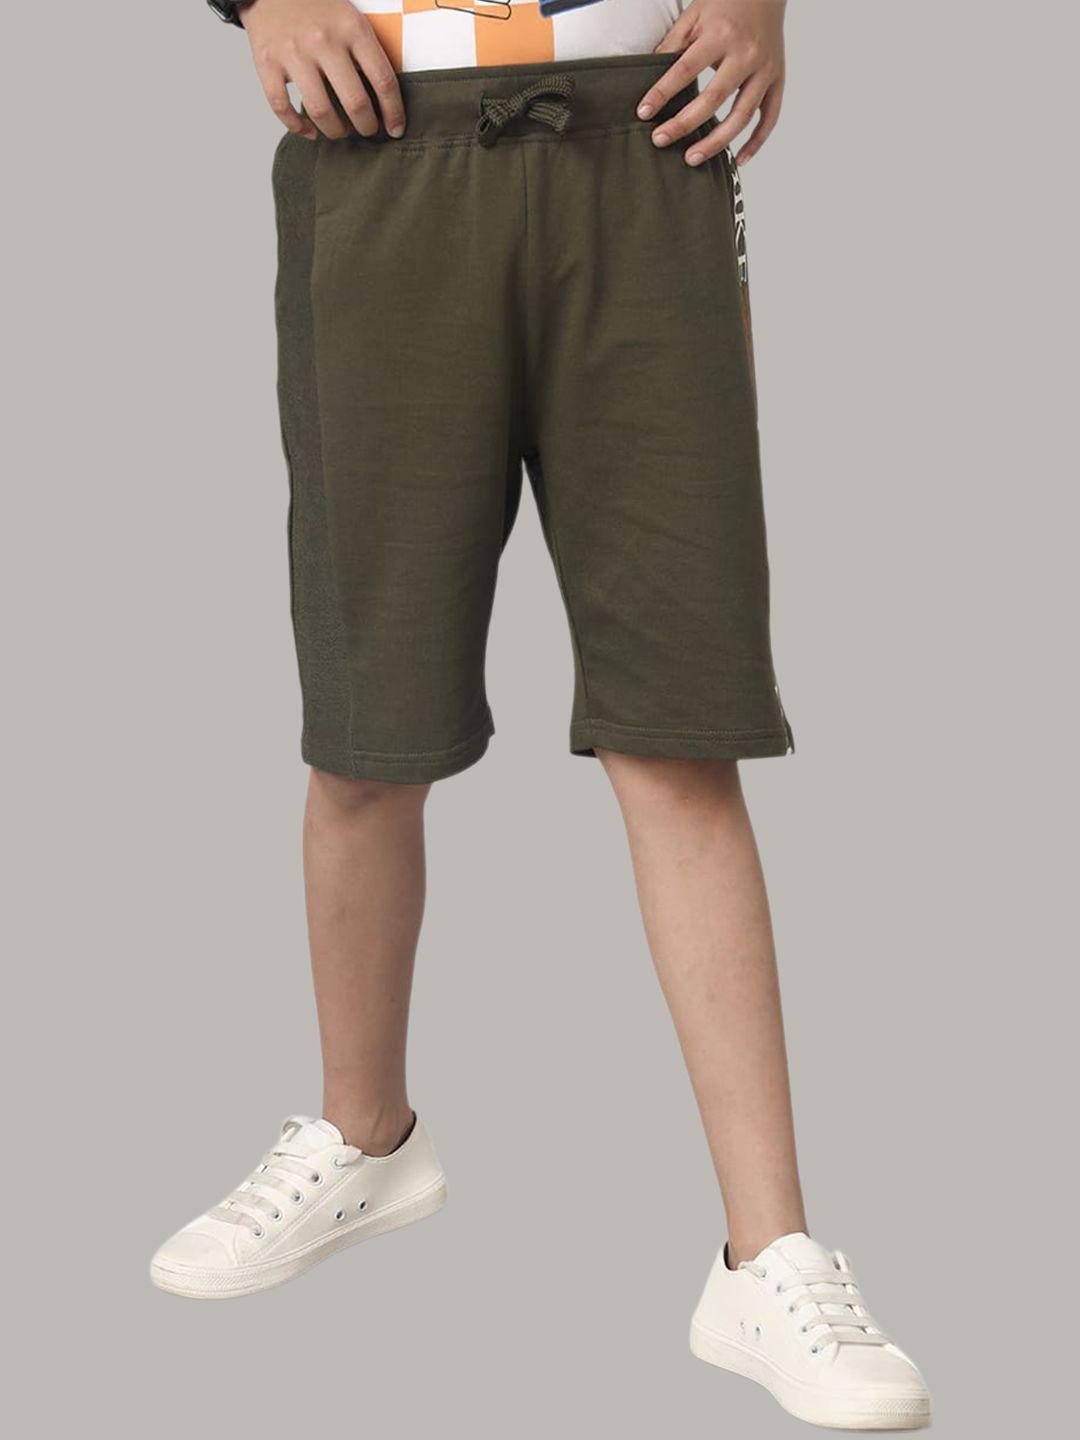 under fourteen only boys typography printed cotton shorts